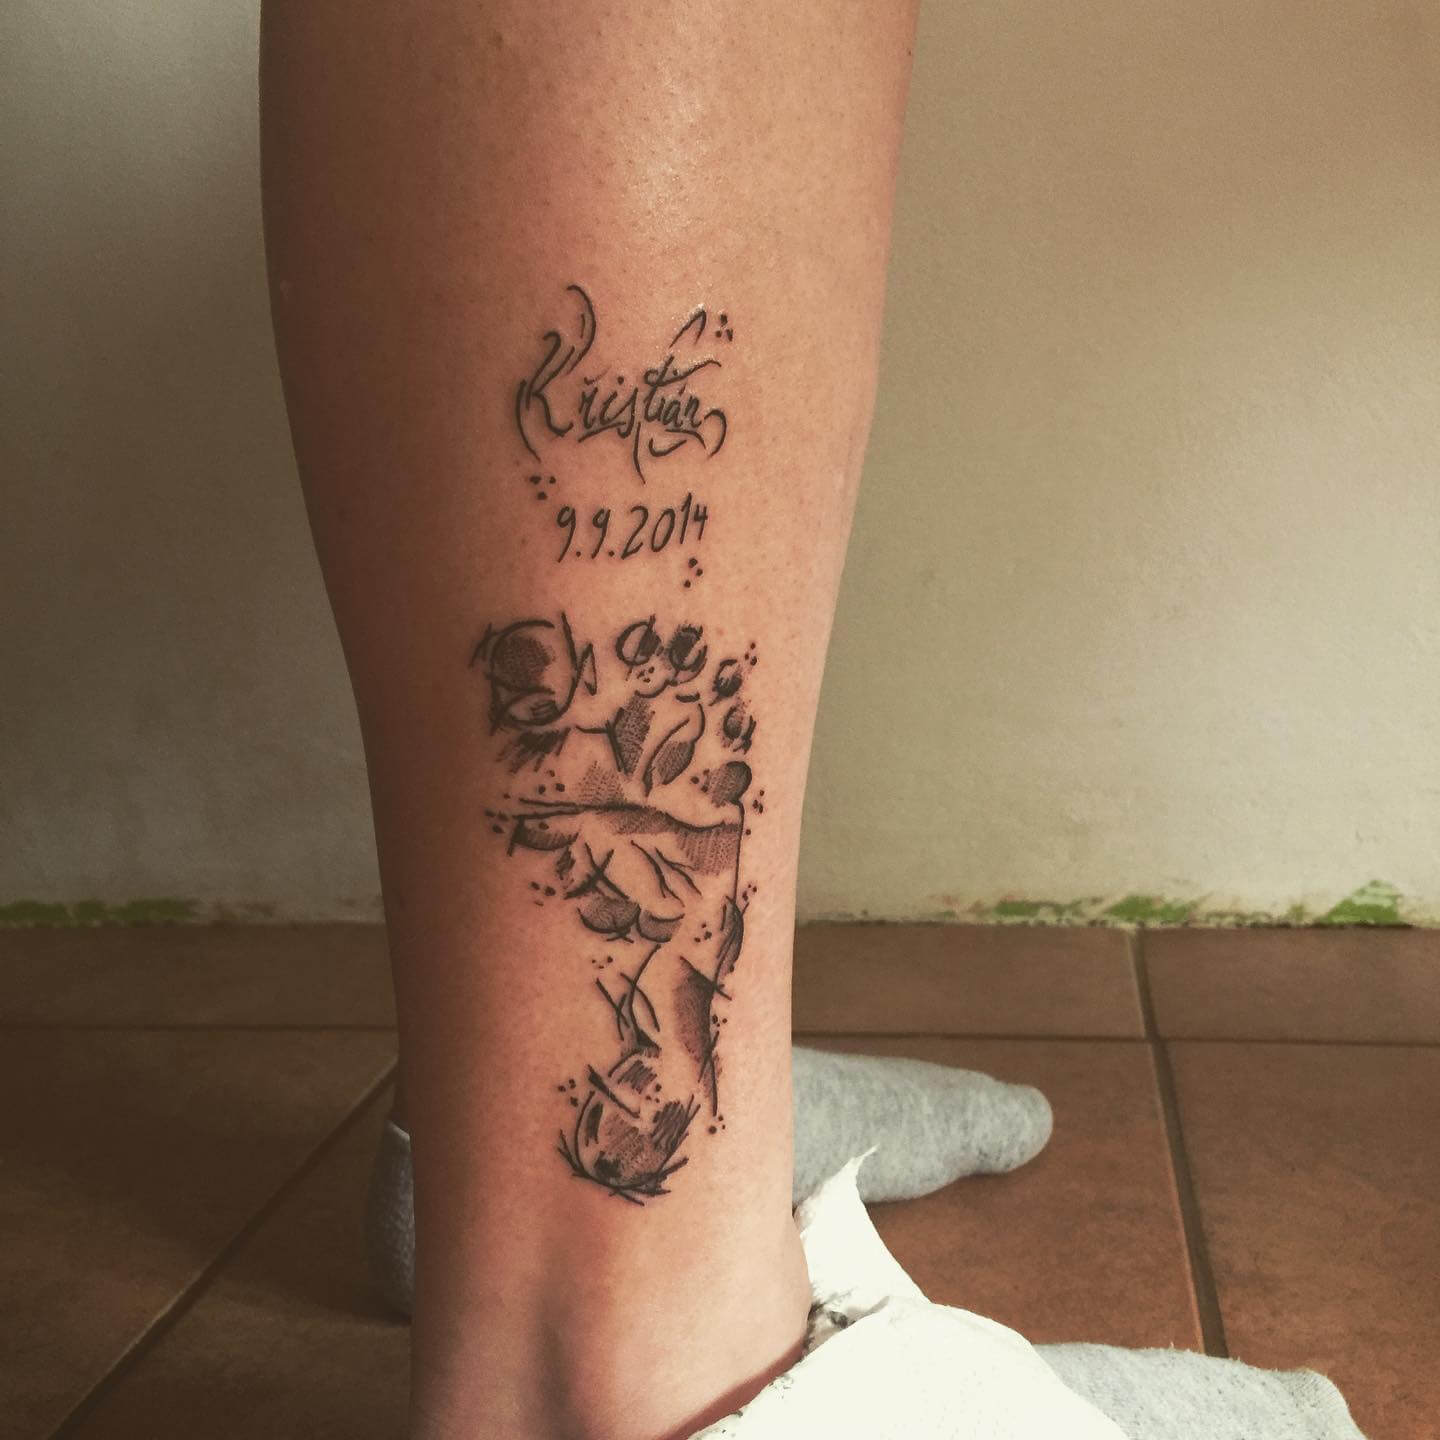 34 Leg Tattoos That Don't Suck (And You Might Want To Steal For Yourself)